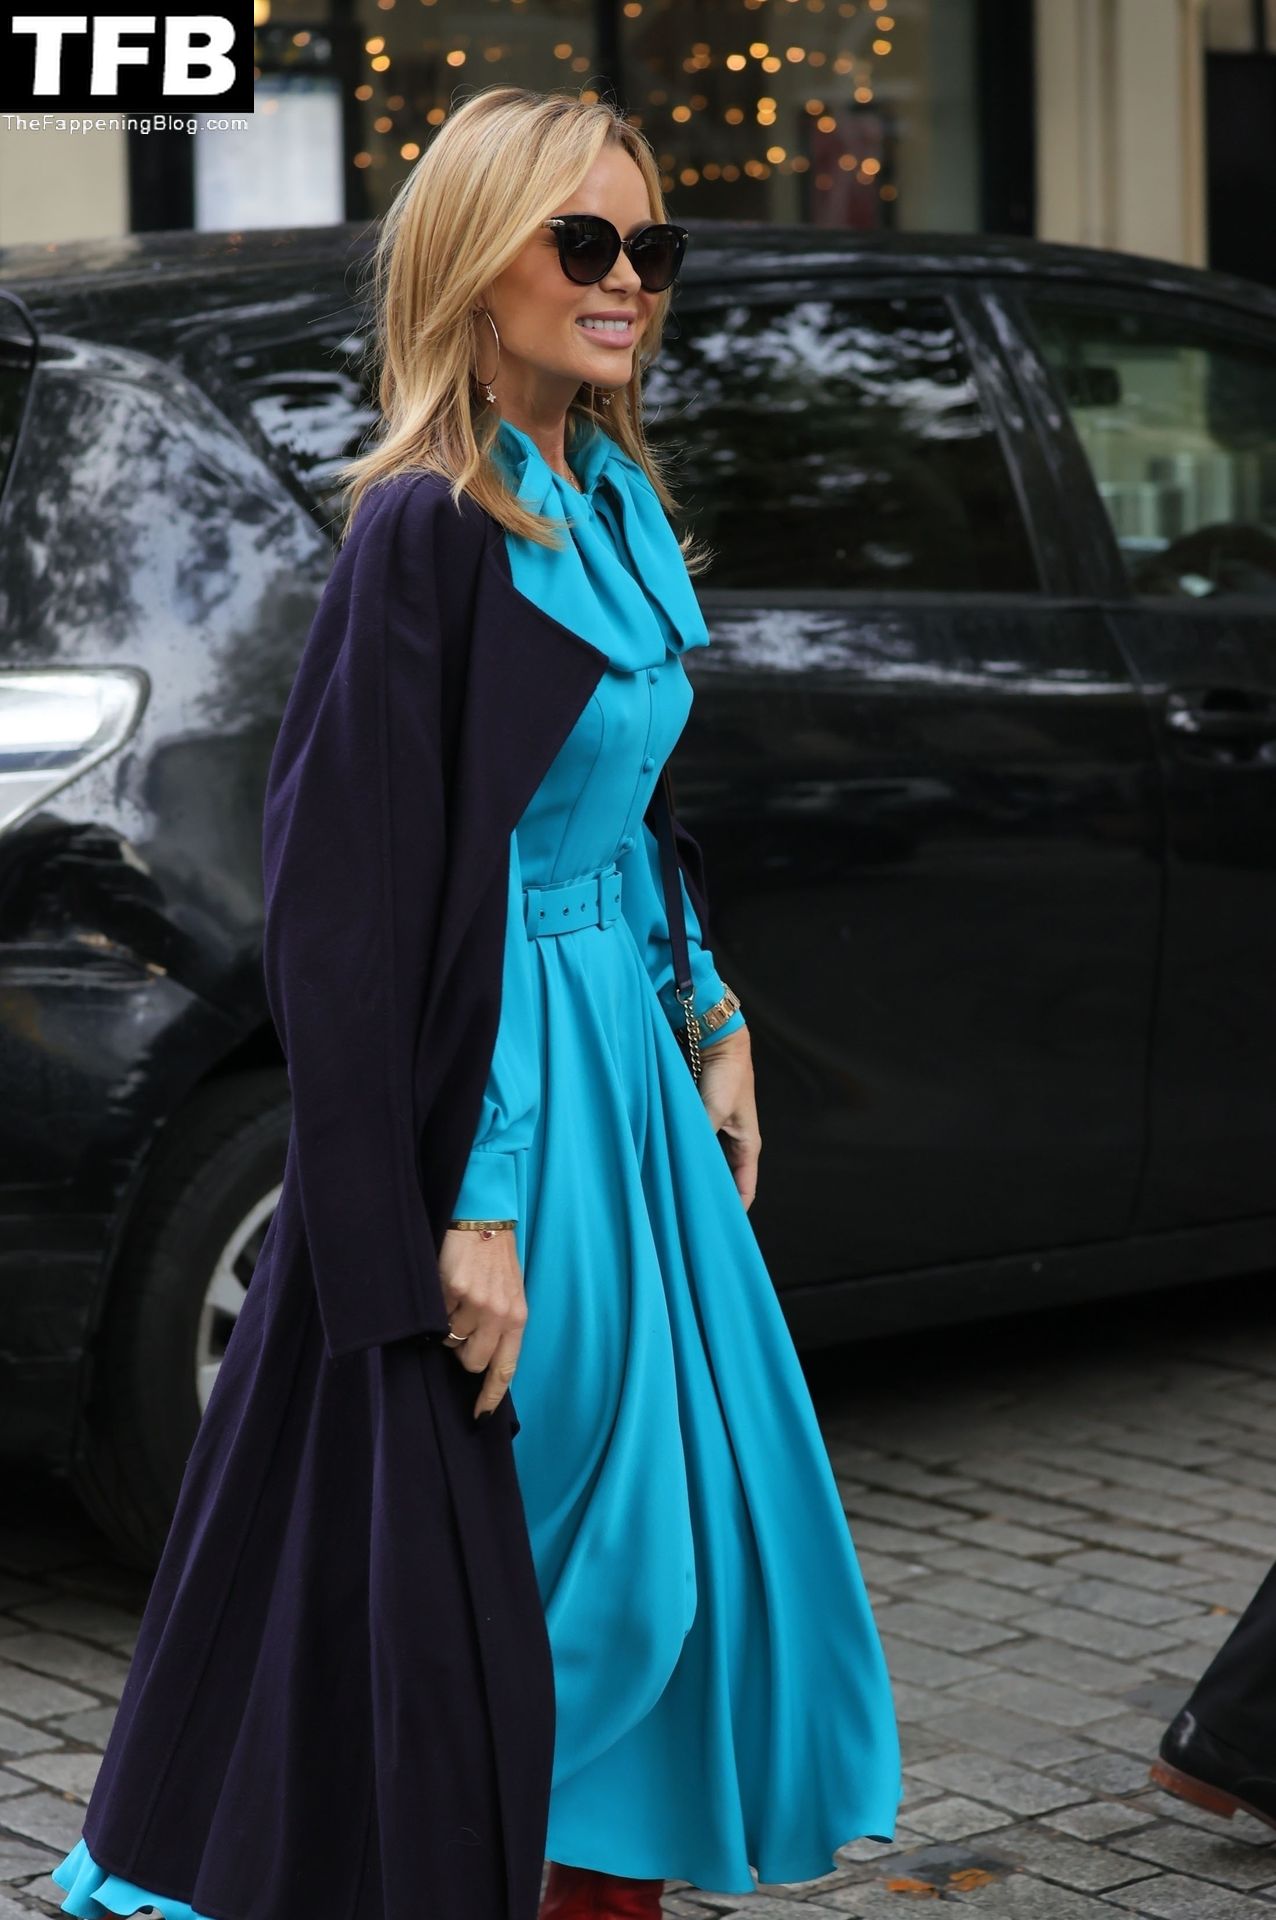 Amanda Holden is Spotted at Global Studios (71 Photos)